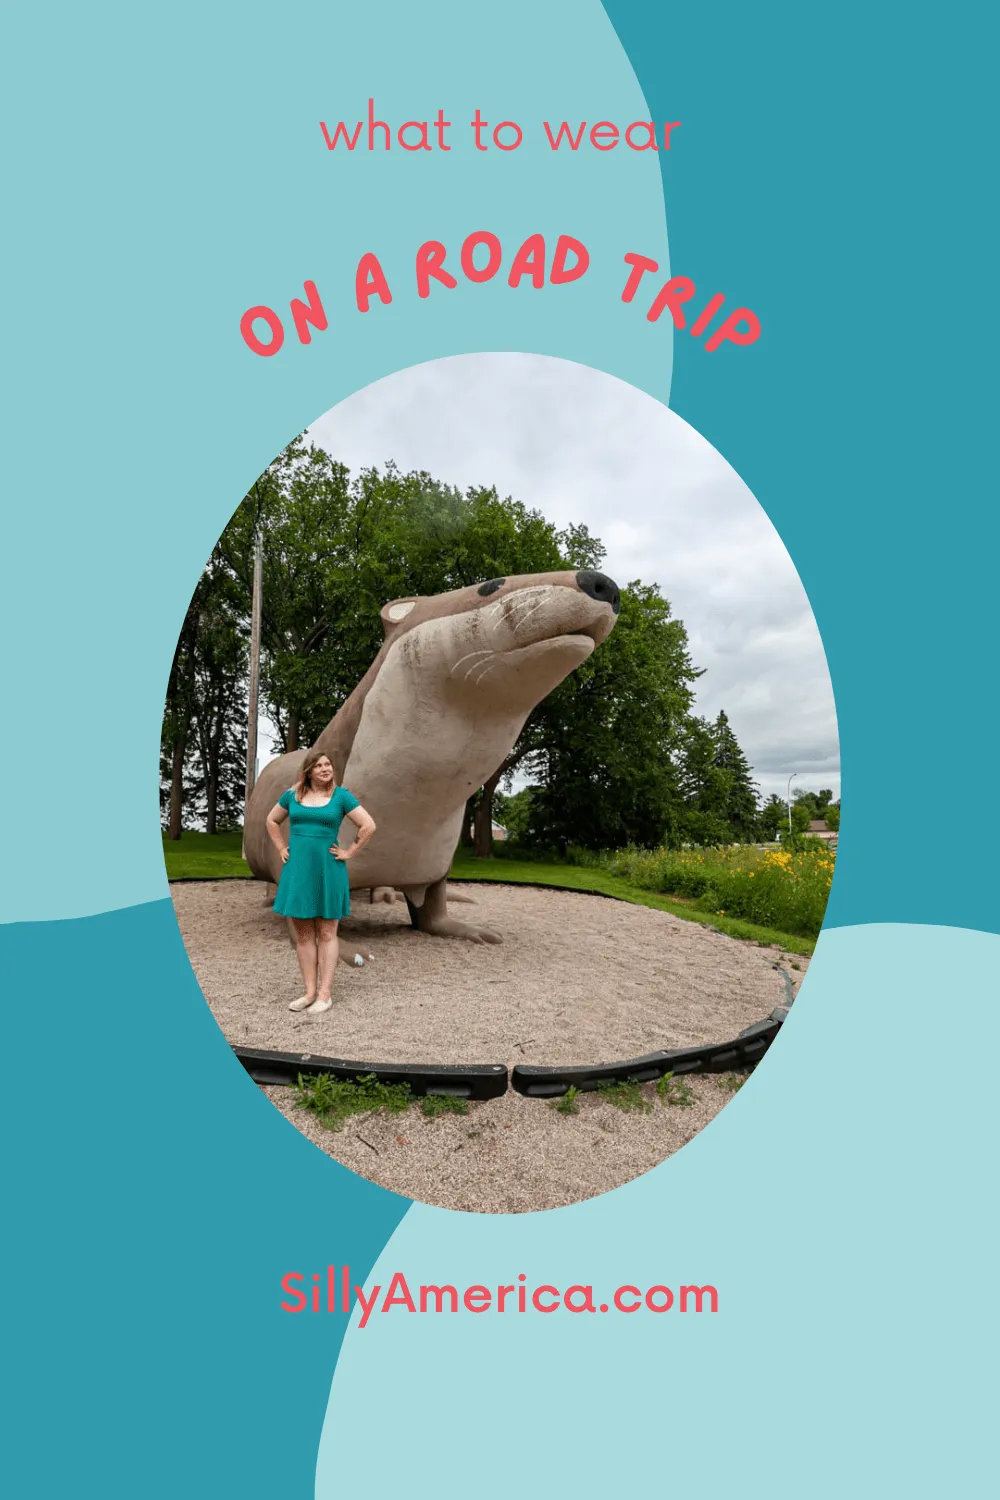 Are you gearing up for a long car trip, packing your bags, and left wondering what to wear on a road trip? Read on for all my tips for comfy road trip outfits and more of what to pack in your luggage. #RoadTripOutfitIdeas #RoadTripOutfit #RoadTripAesthetic #WhatToWearOnARoadTrip #RoadTripPacking #RoadTripPackingCar #RoadTripPackingList #RoadTripPackingClothes #RoadTripPackingFOrAdults #RoadTripPackingTips #RoadTripPackingEssentials #RoadTripPackingIdeas #LongRoadTripPacking